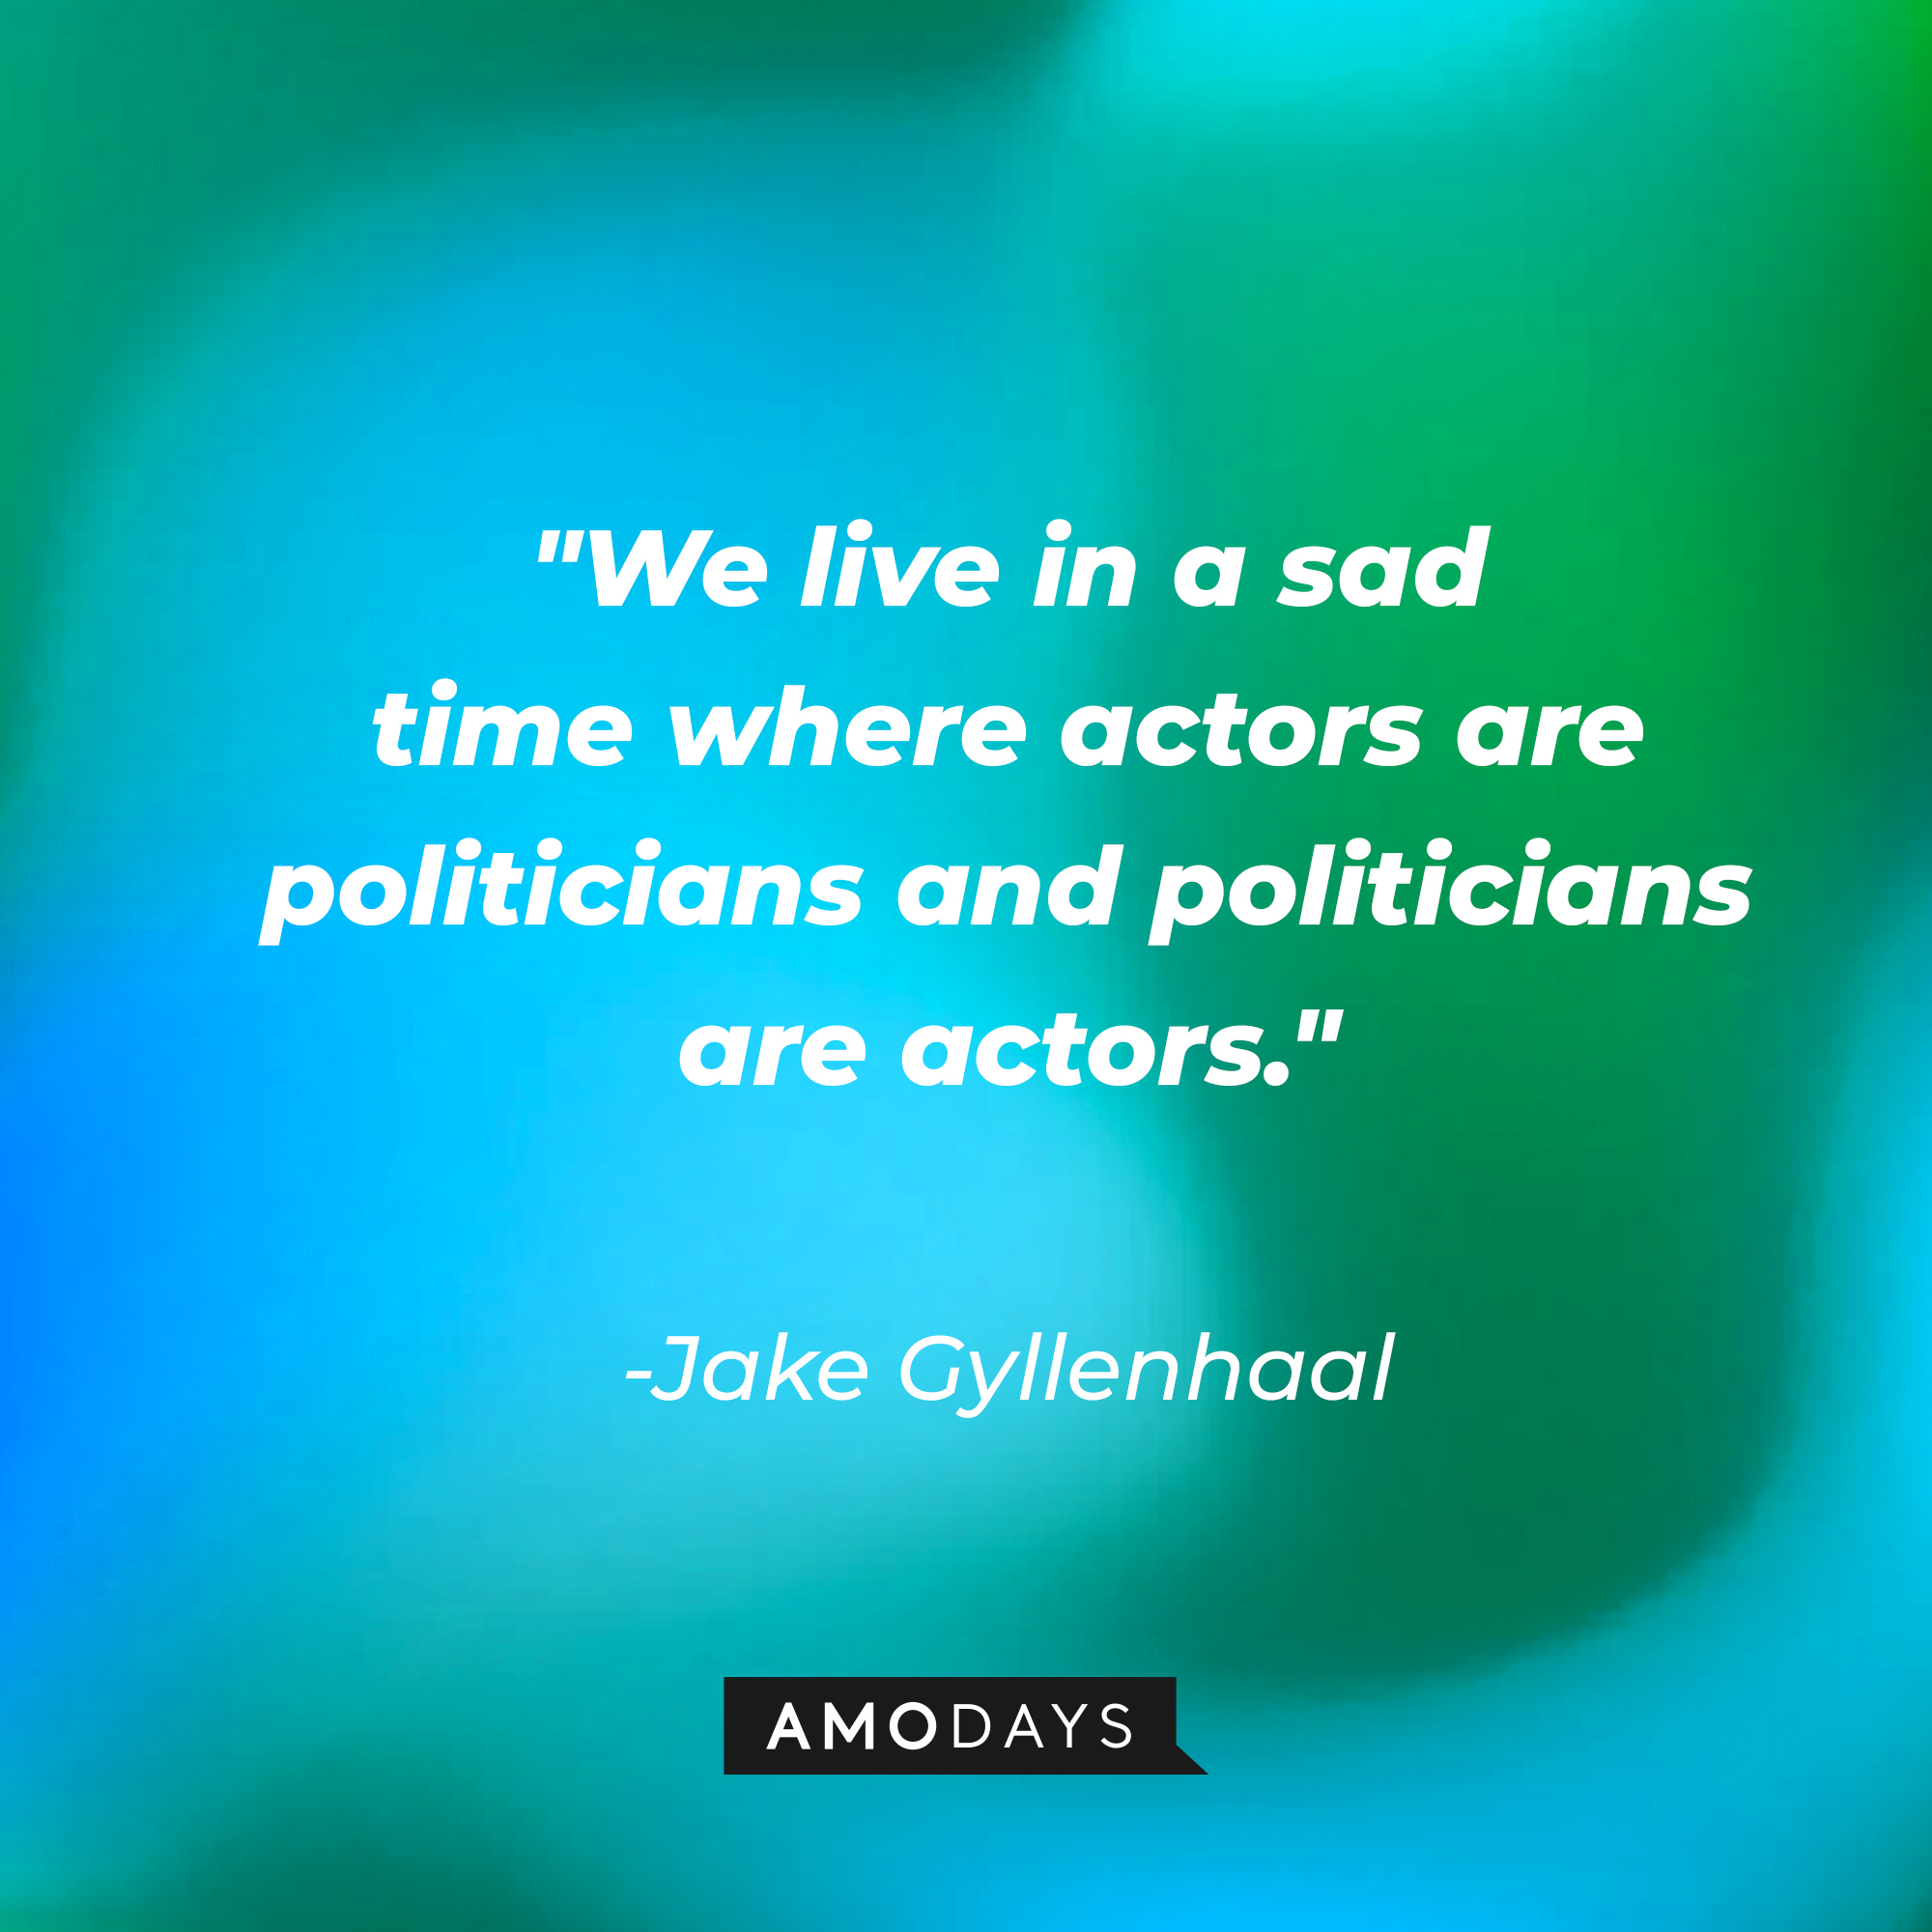 Jake Gyllenhaal's quote: "We live in a sad time where actors are politicians and politicians are actors." | Source: AmoDays